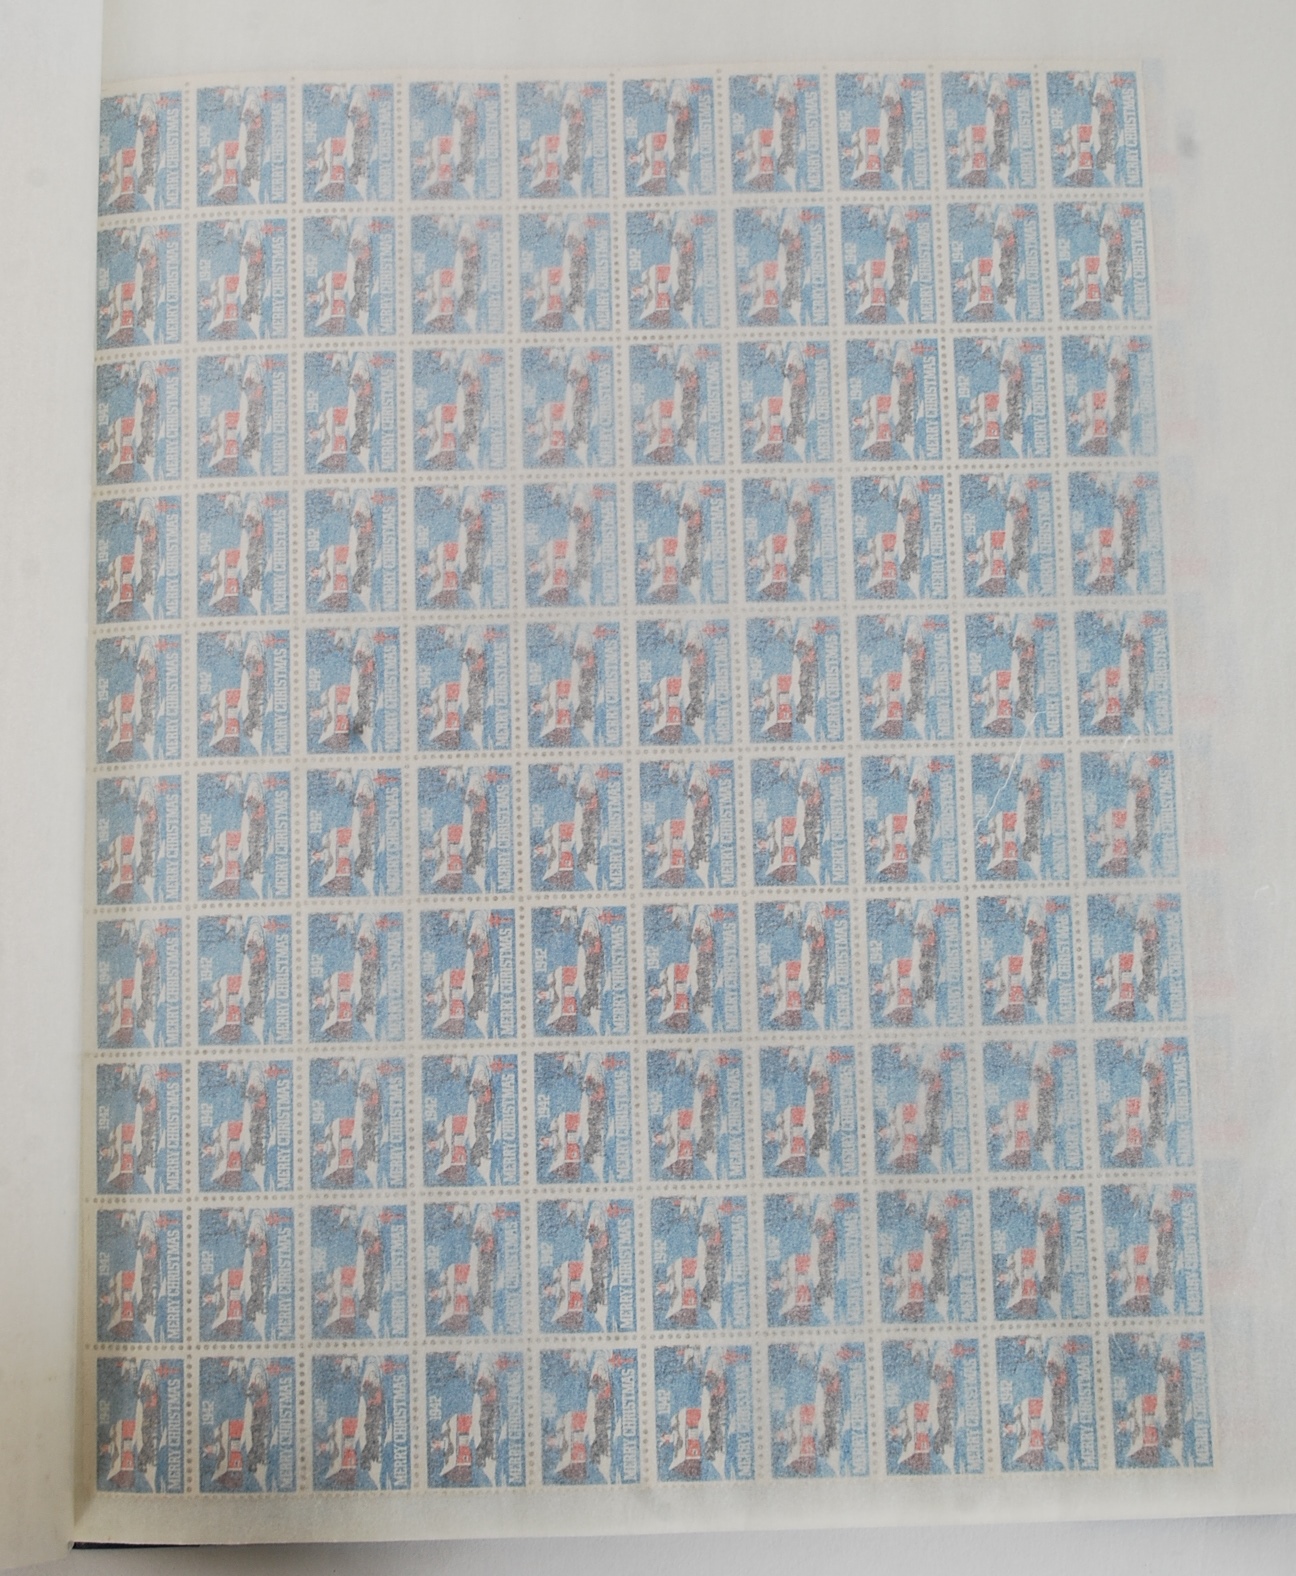 STAMPS 1940s-1980s Large quantity of USA Seals (Boys Town/Clubs, TB, Lung, Easter, - Image 2 of 3